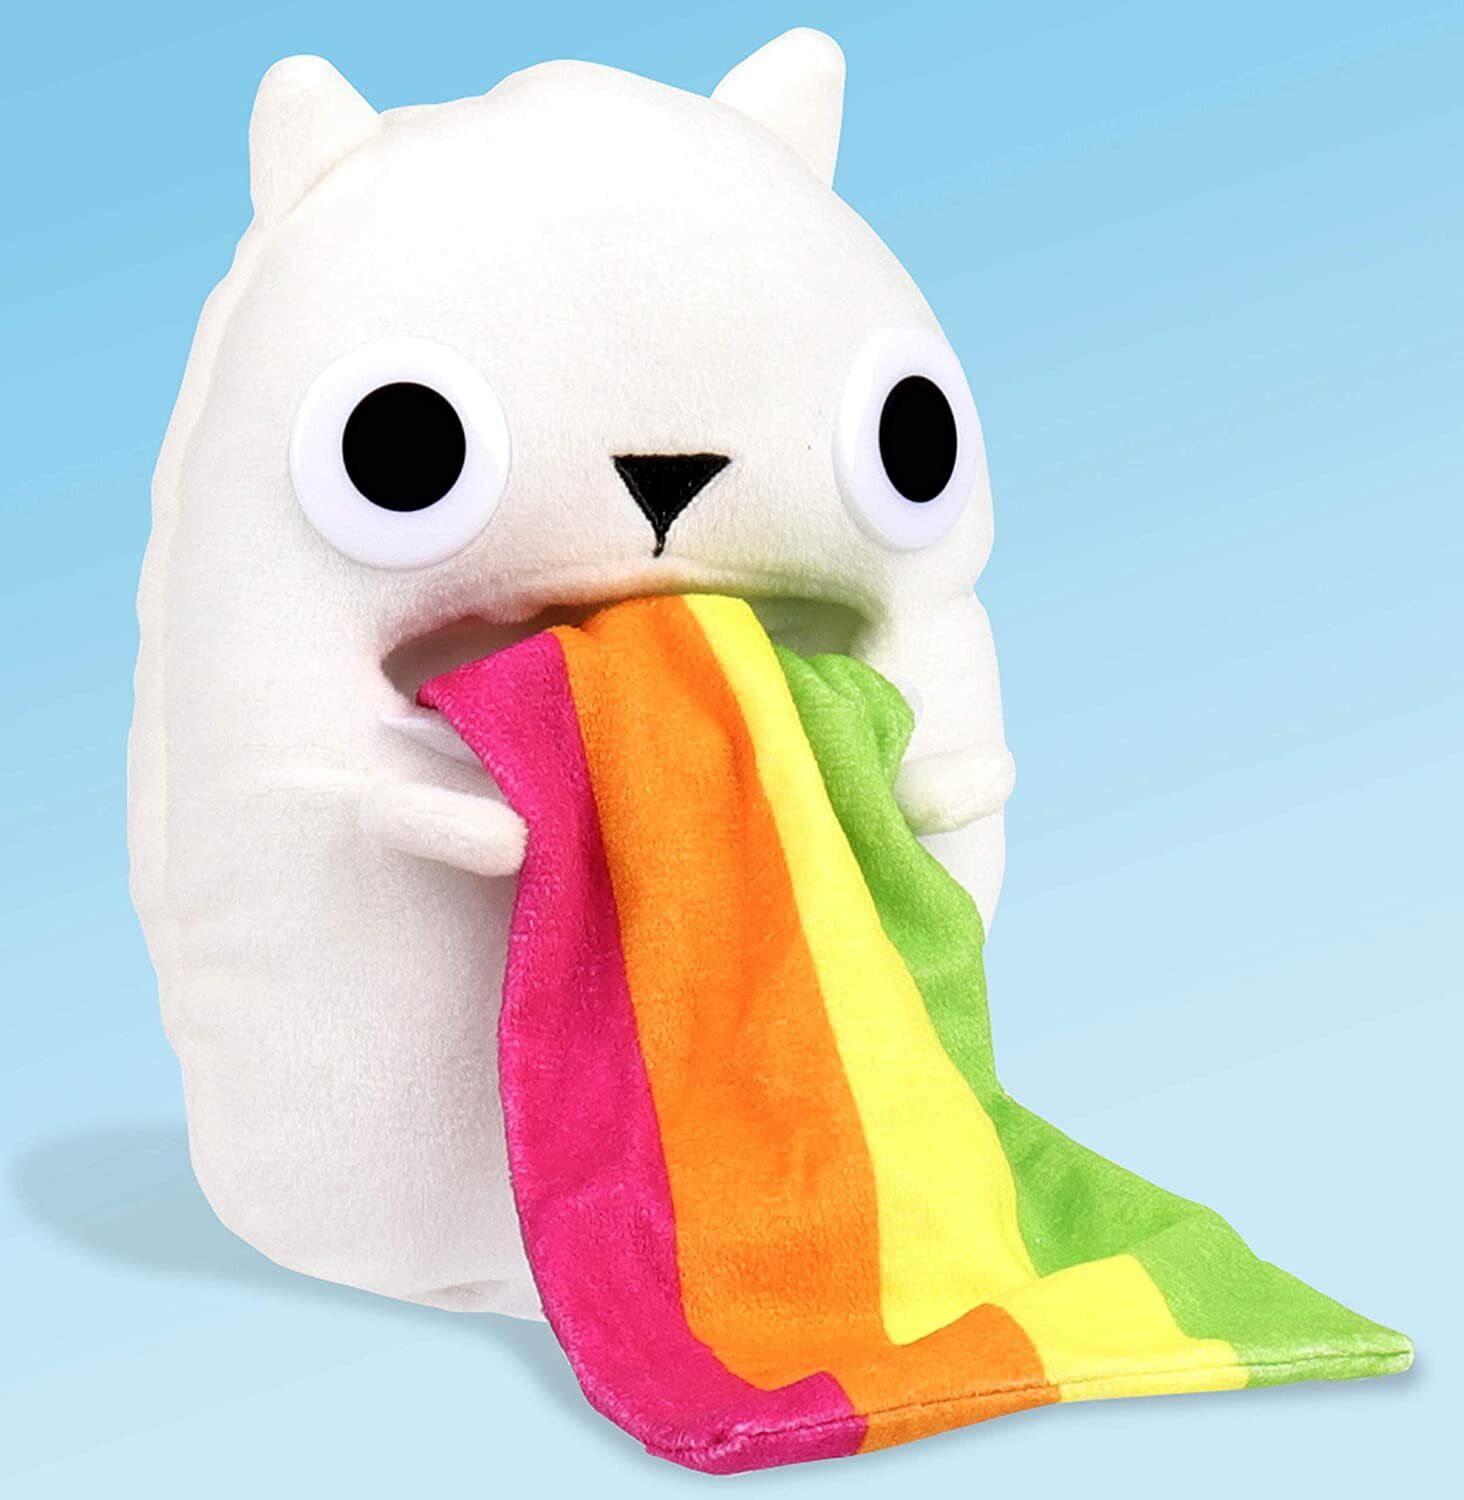 EXPLODING KITTENS Collectible Plush Rainbow Ral